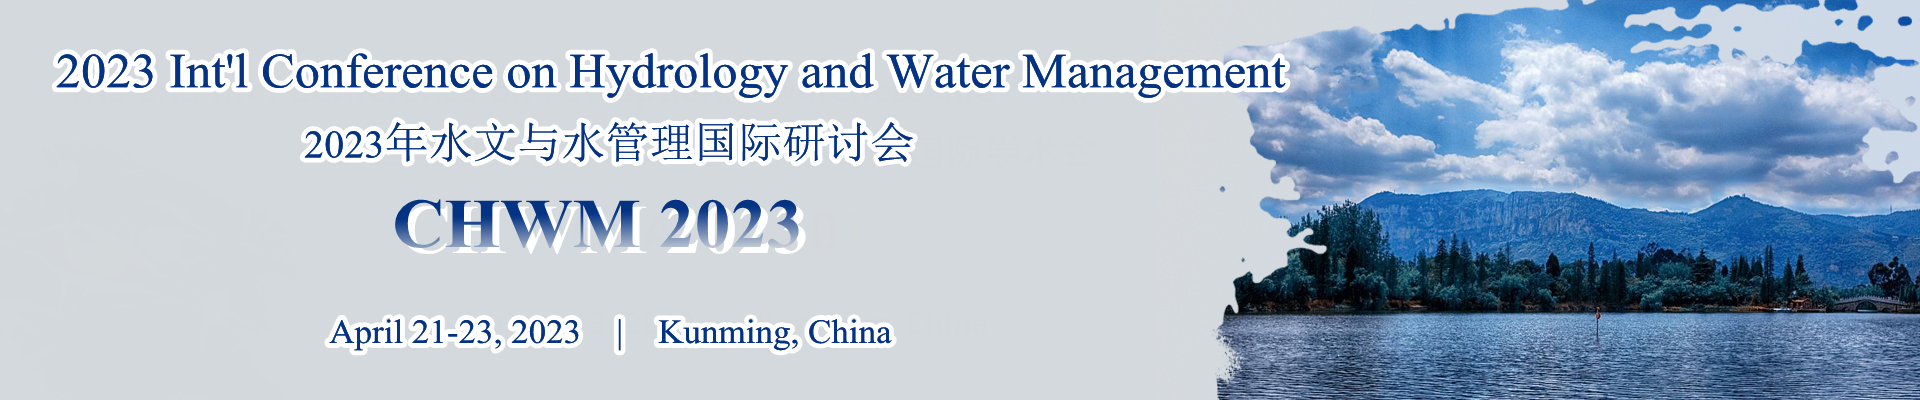 2023 Int’l Conference on Hydrology and Water Management (CHWM 2023)